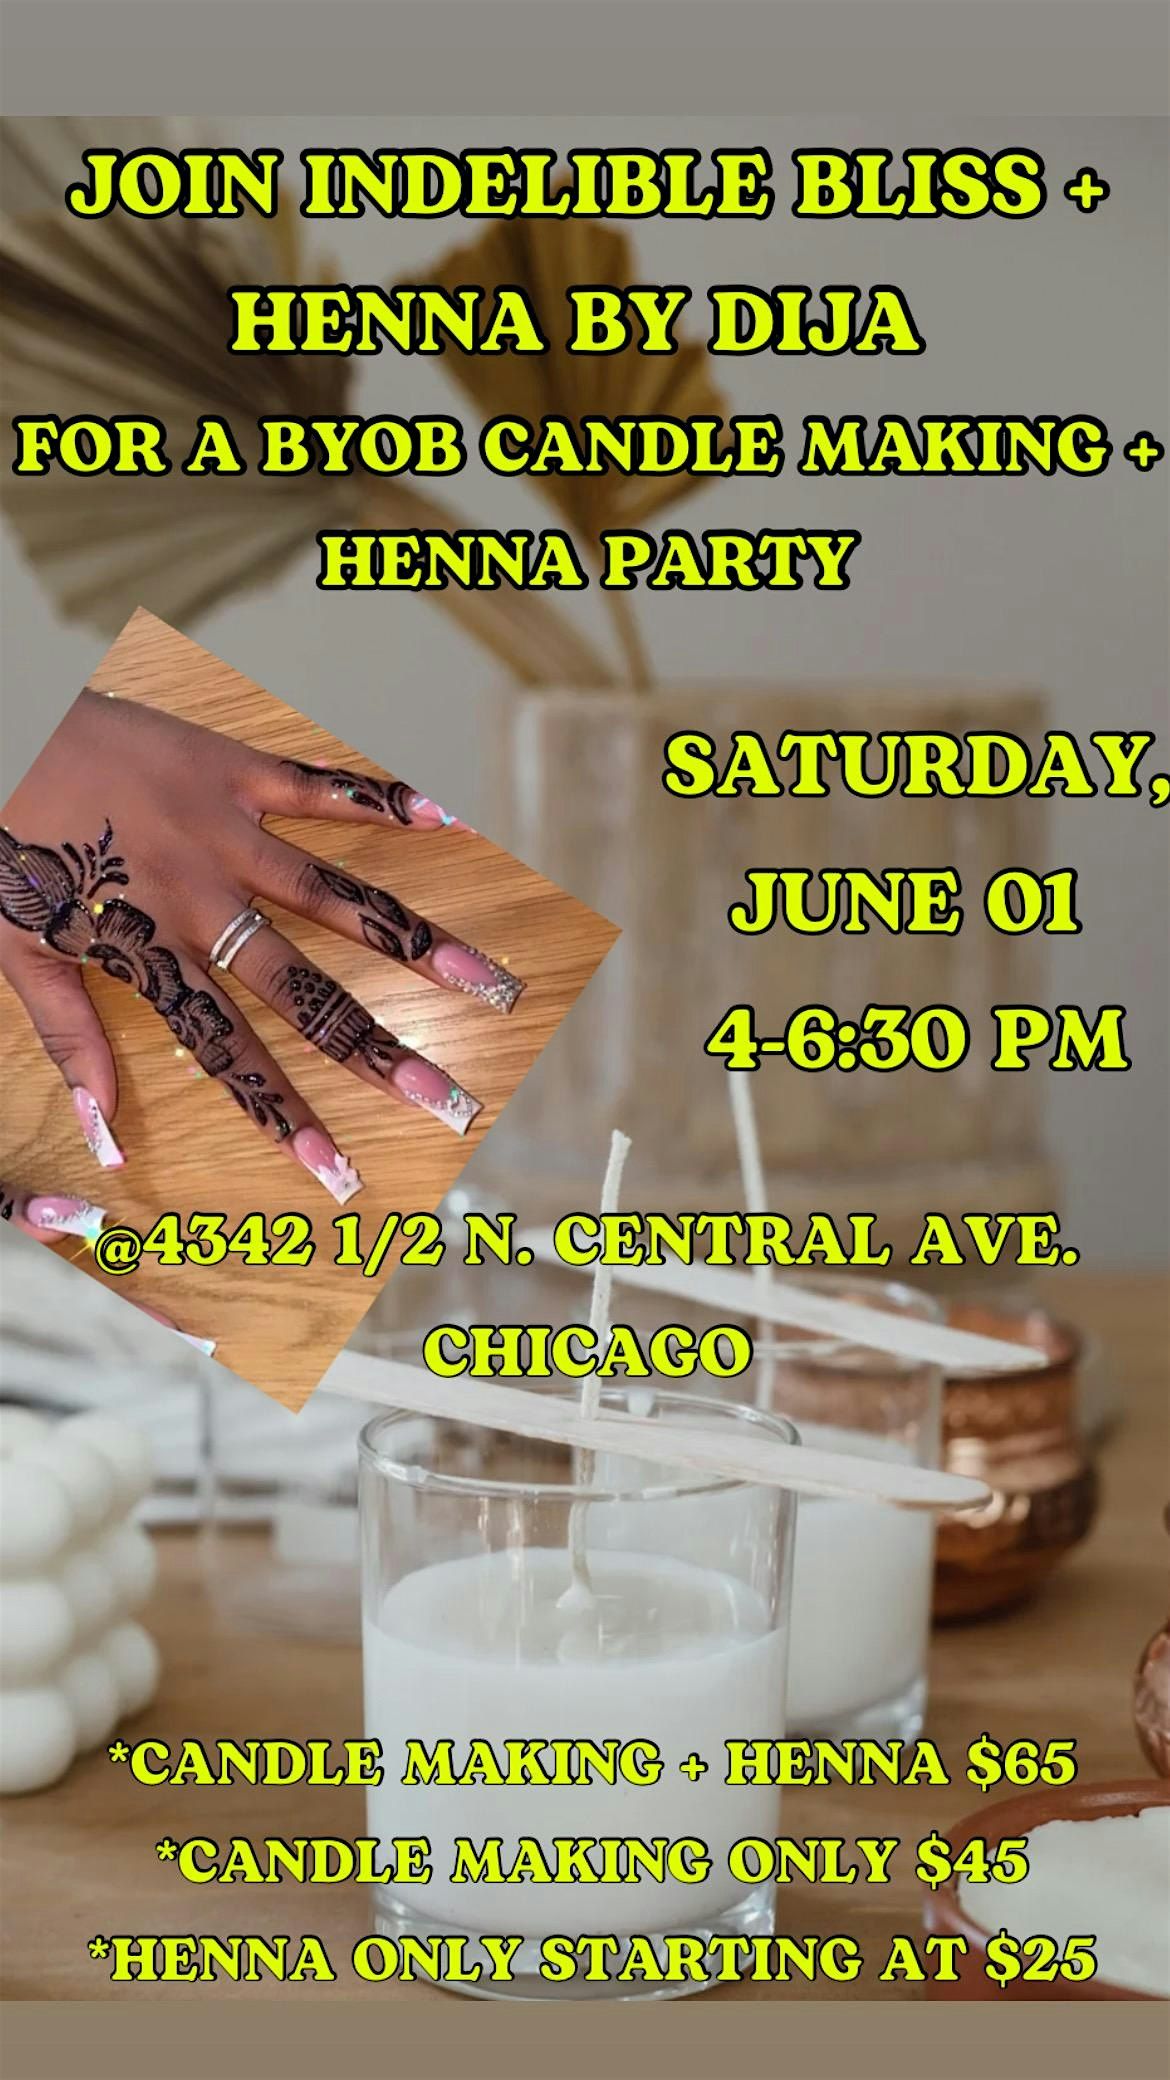 BYOB CANDLE MAKING & HENNA PARTY